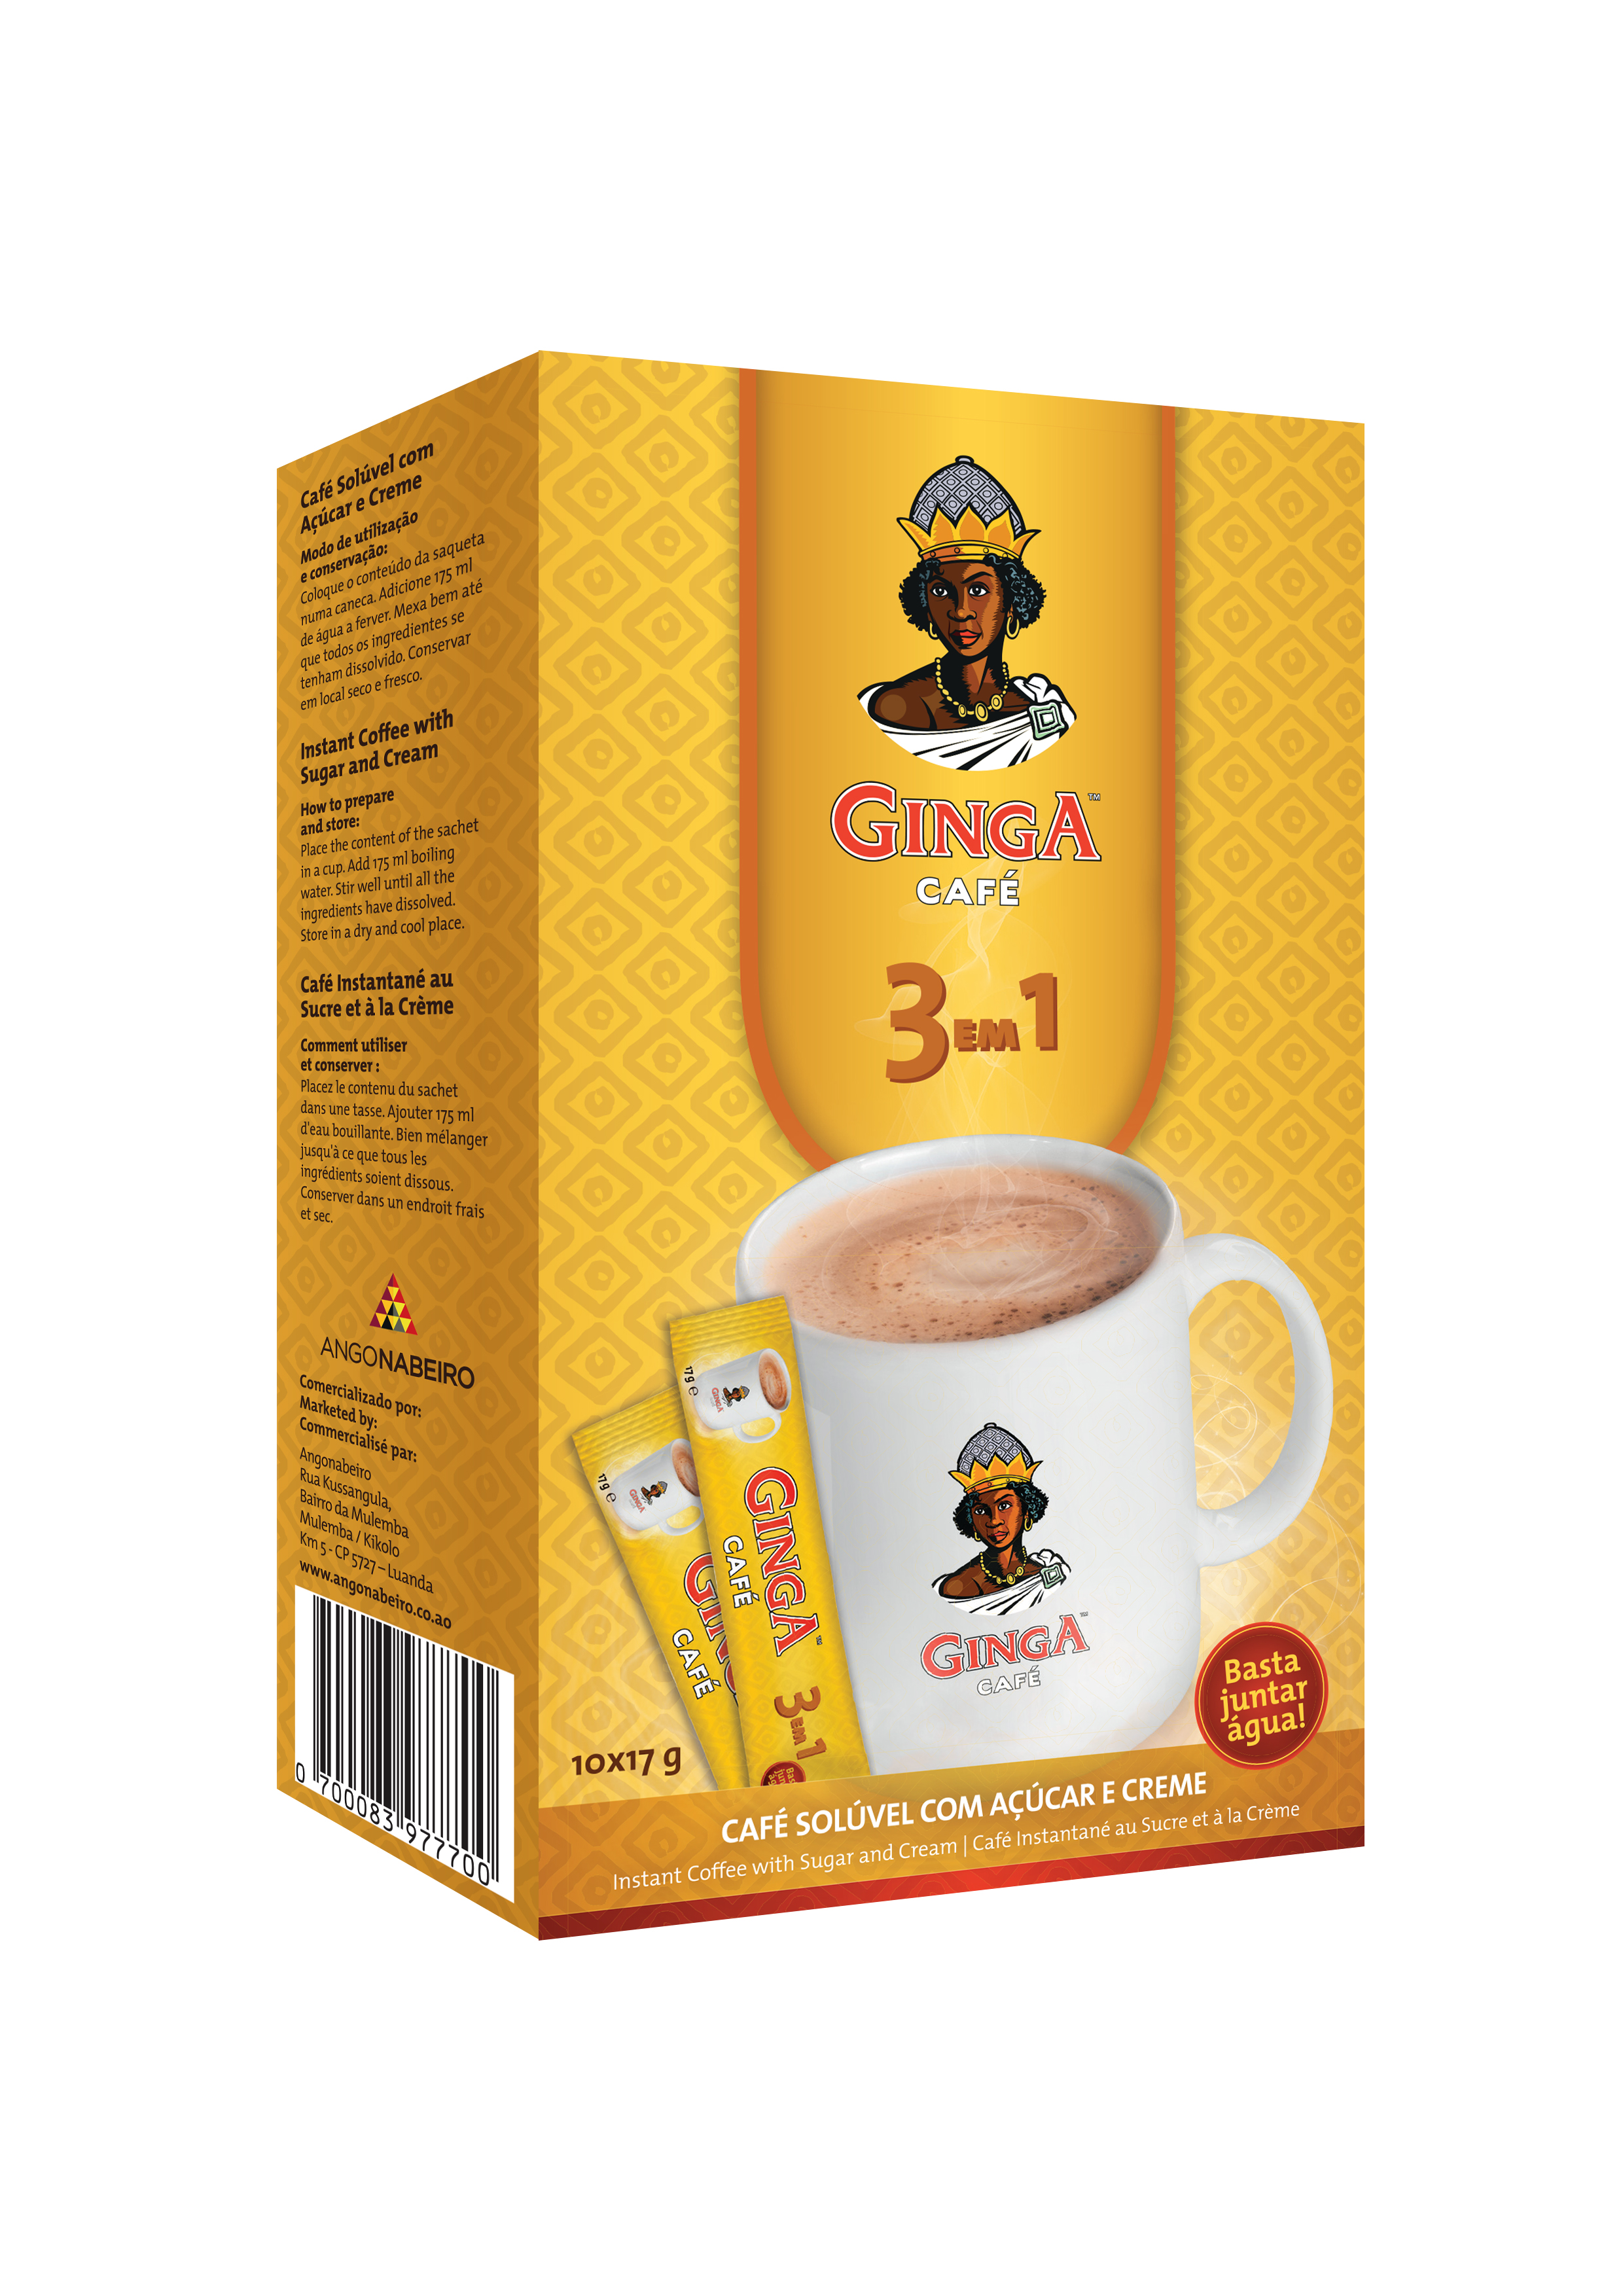 Product image - We are able to produce 3 in 1 coffee under private label and assist with designs of final packaging